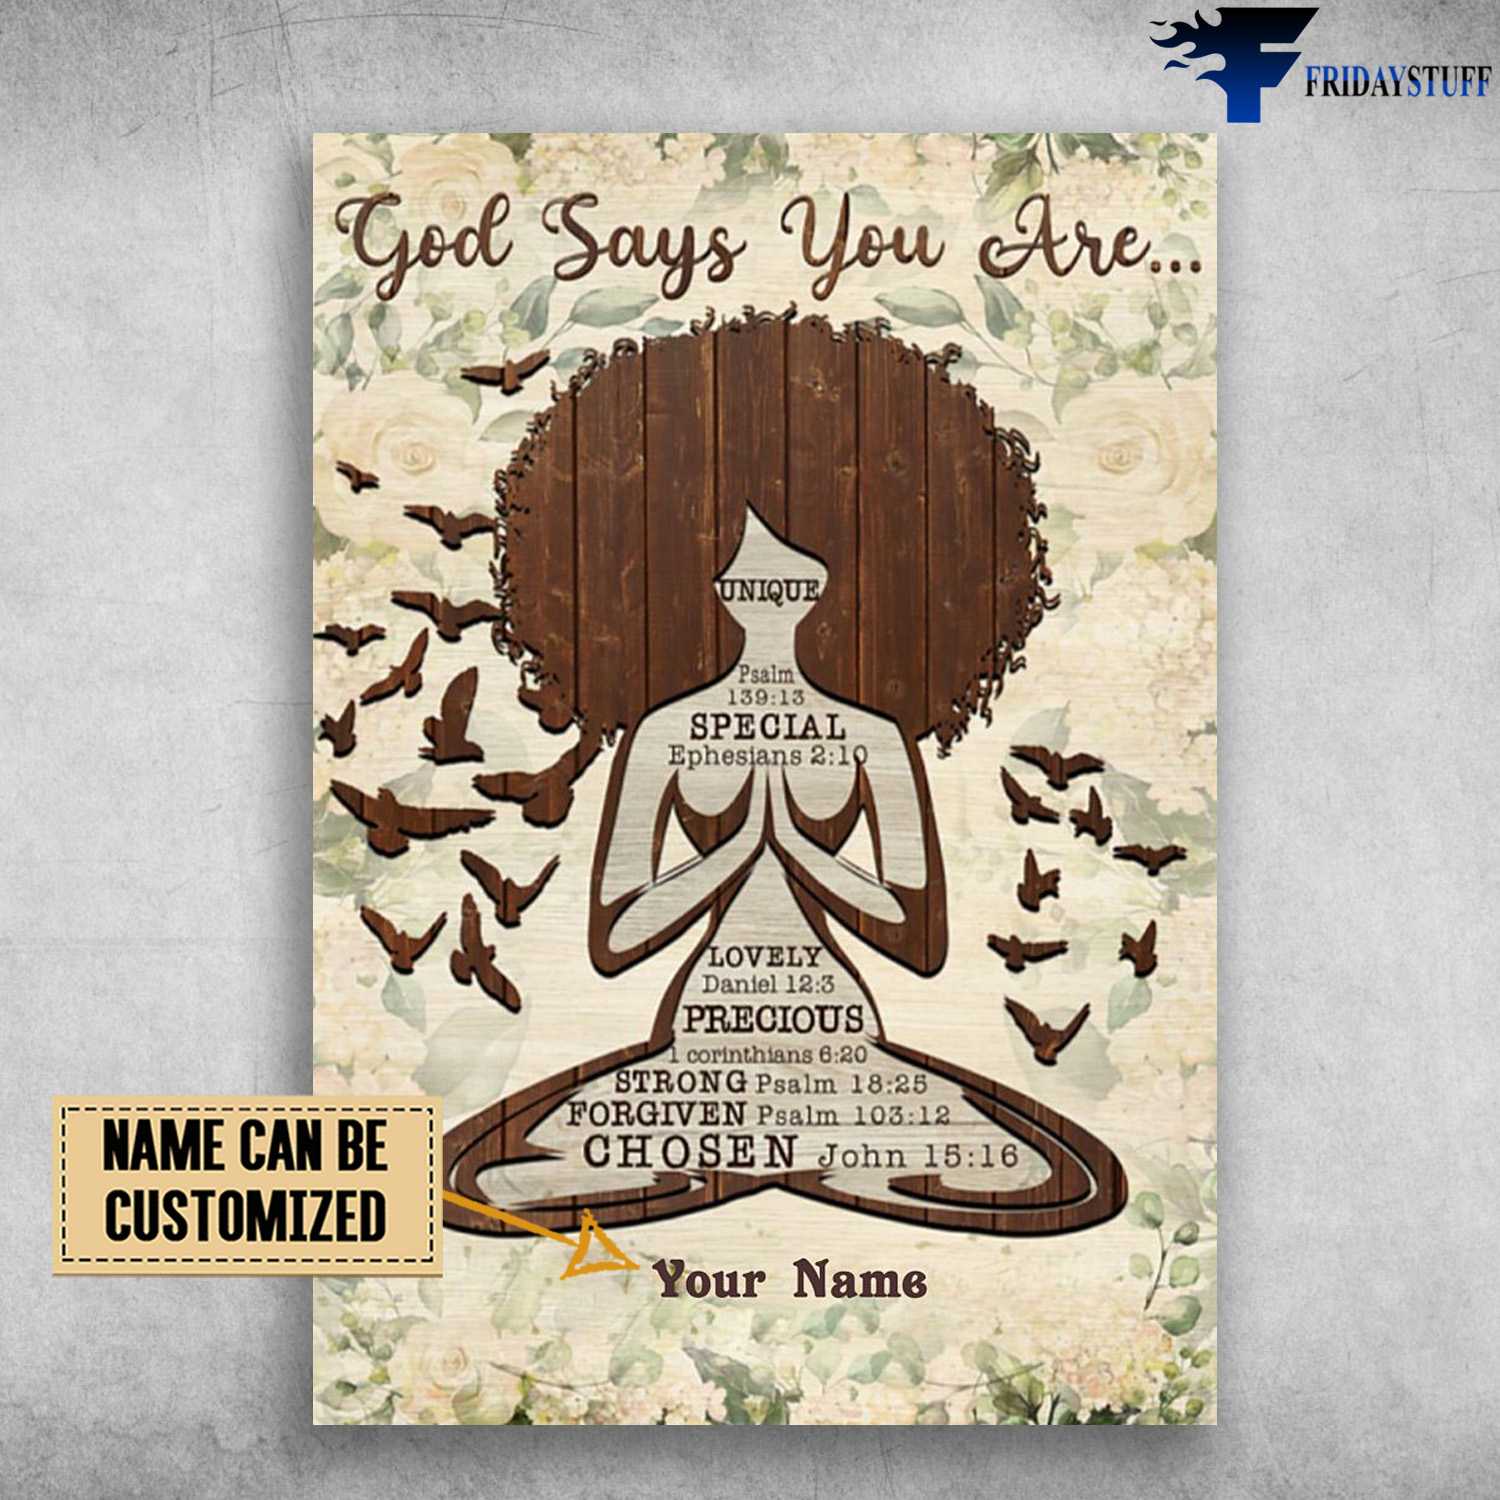 Yoga Poster, Yoga Room, God Says You Are Unique, Special, Lovely, Precious, Strong, Forgiven, Chosen